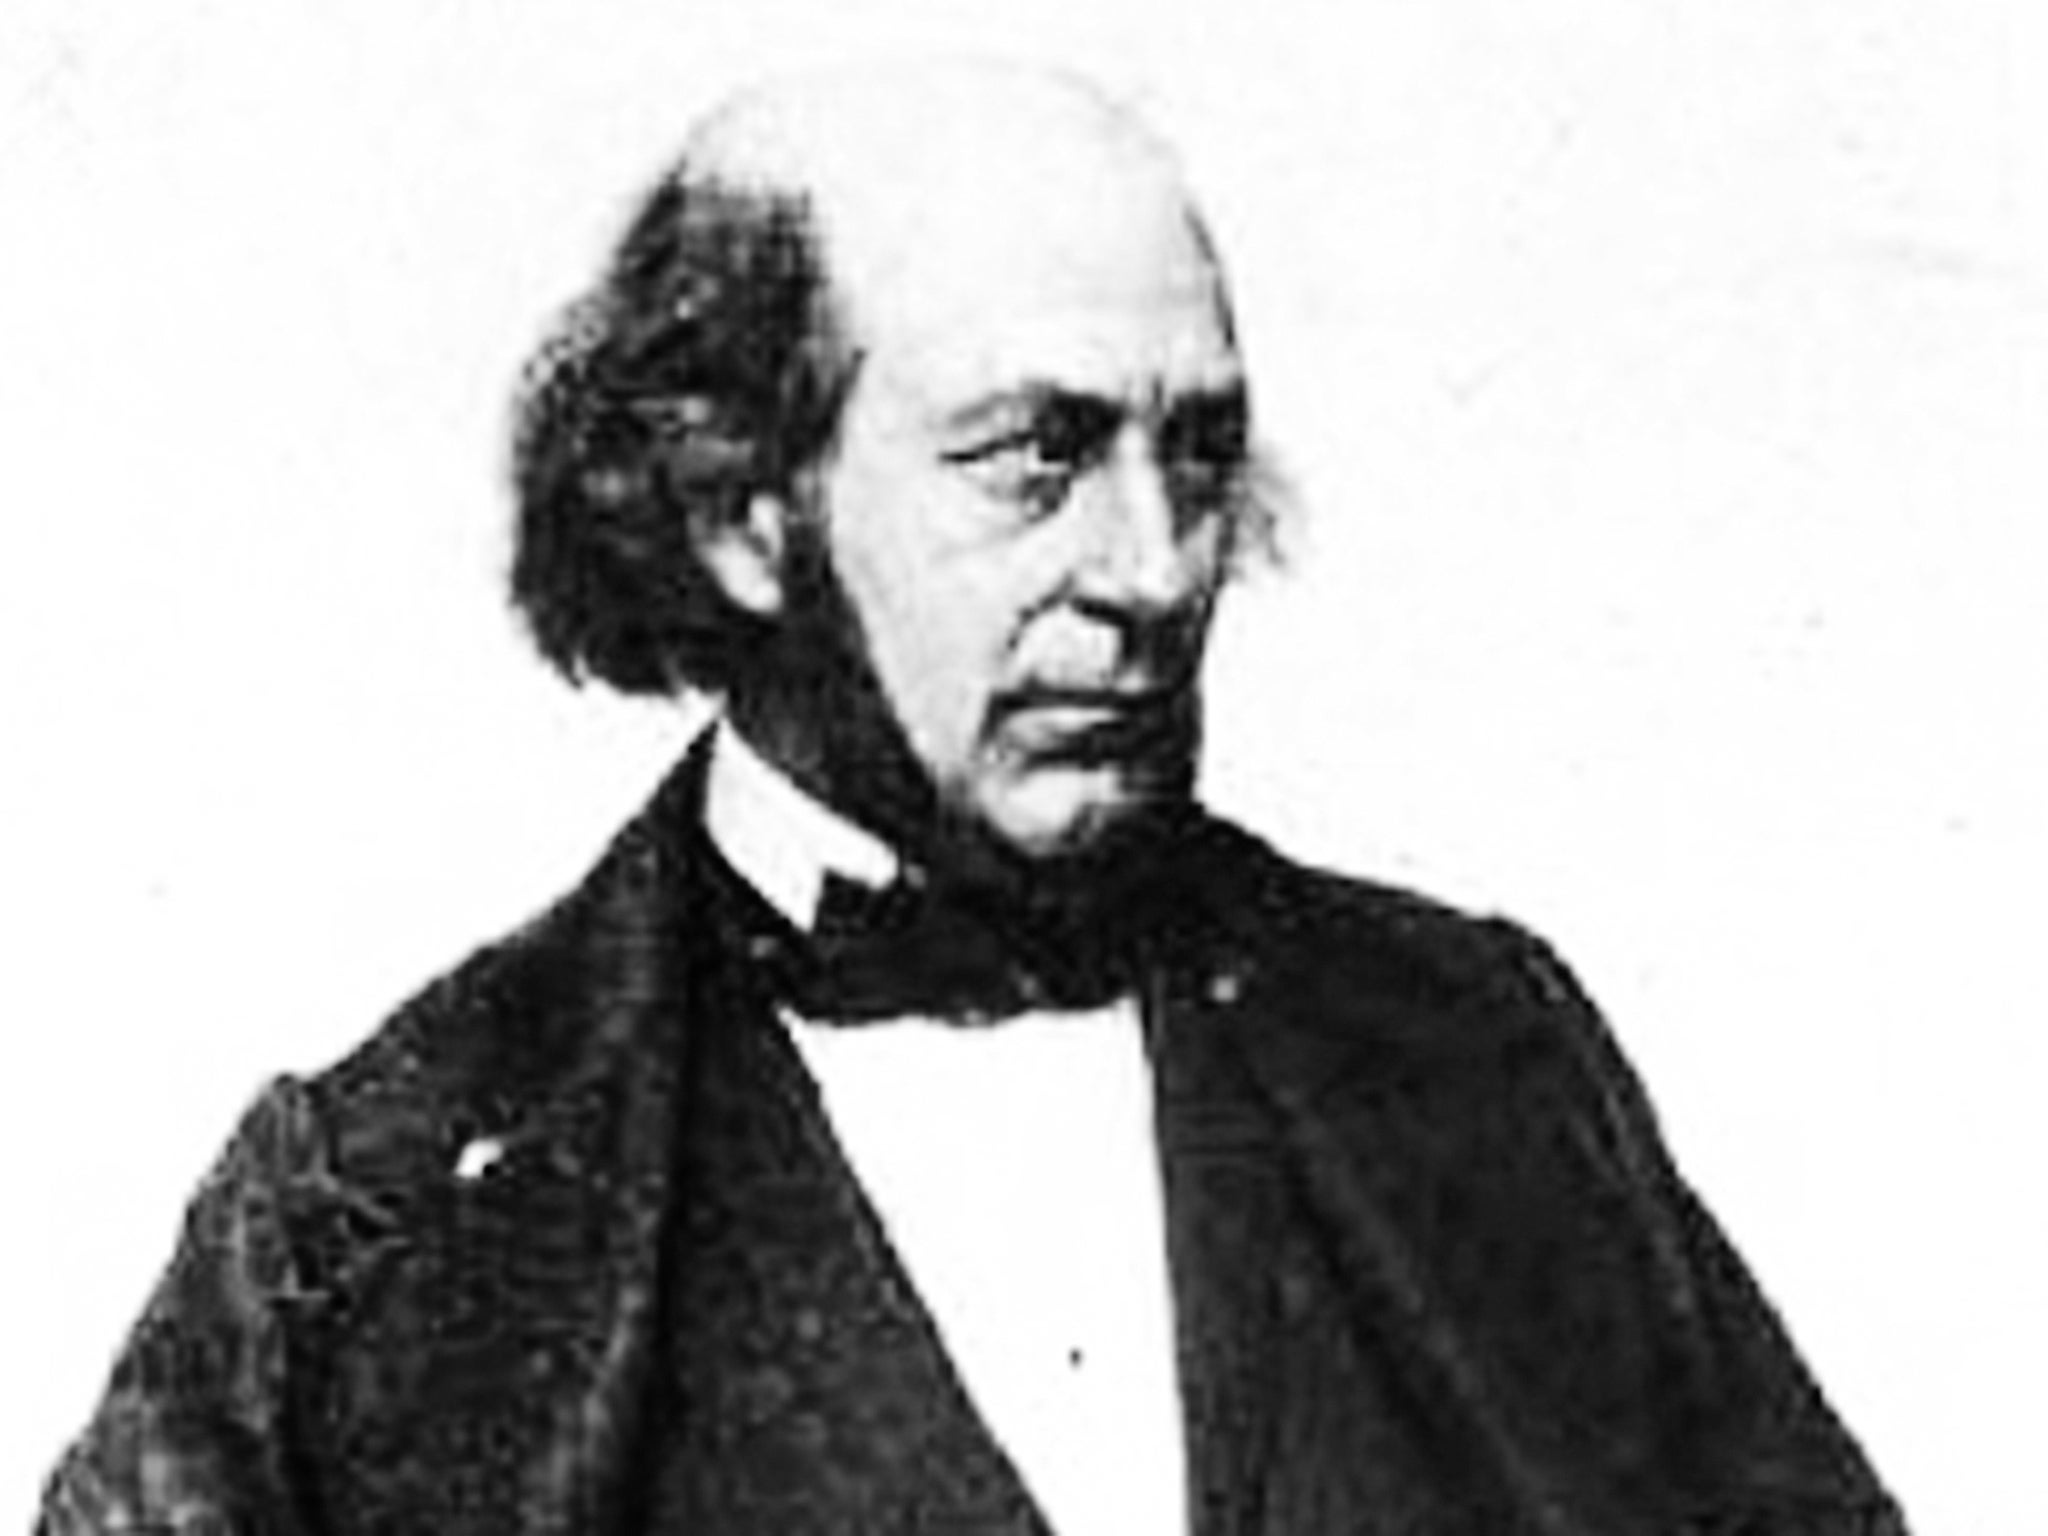 French engineer Aimé Thomé de Gamond, ‘father of the tunnel’, whose 1867 plan was accepted by both Victoria and Napoleon III – but cancelled due to the Franco-Prussian War of 1870